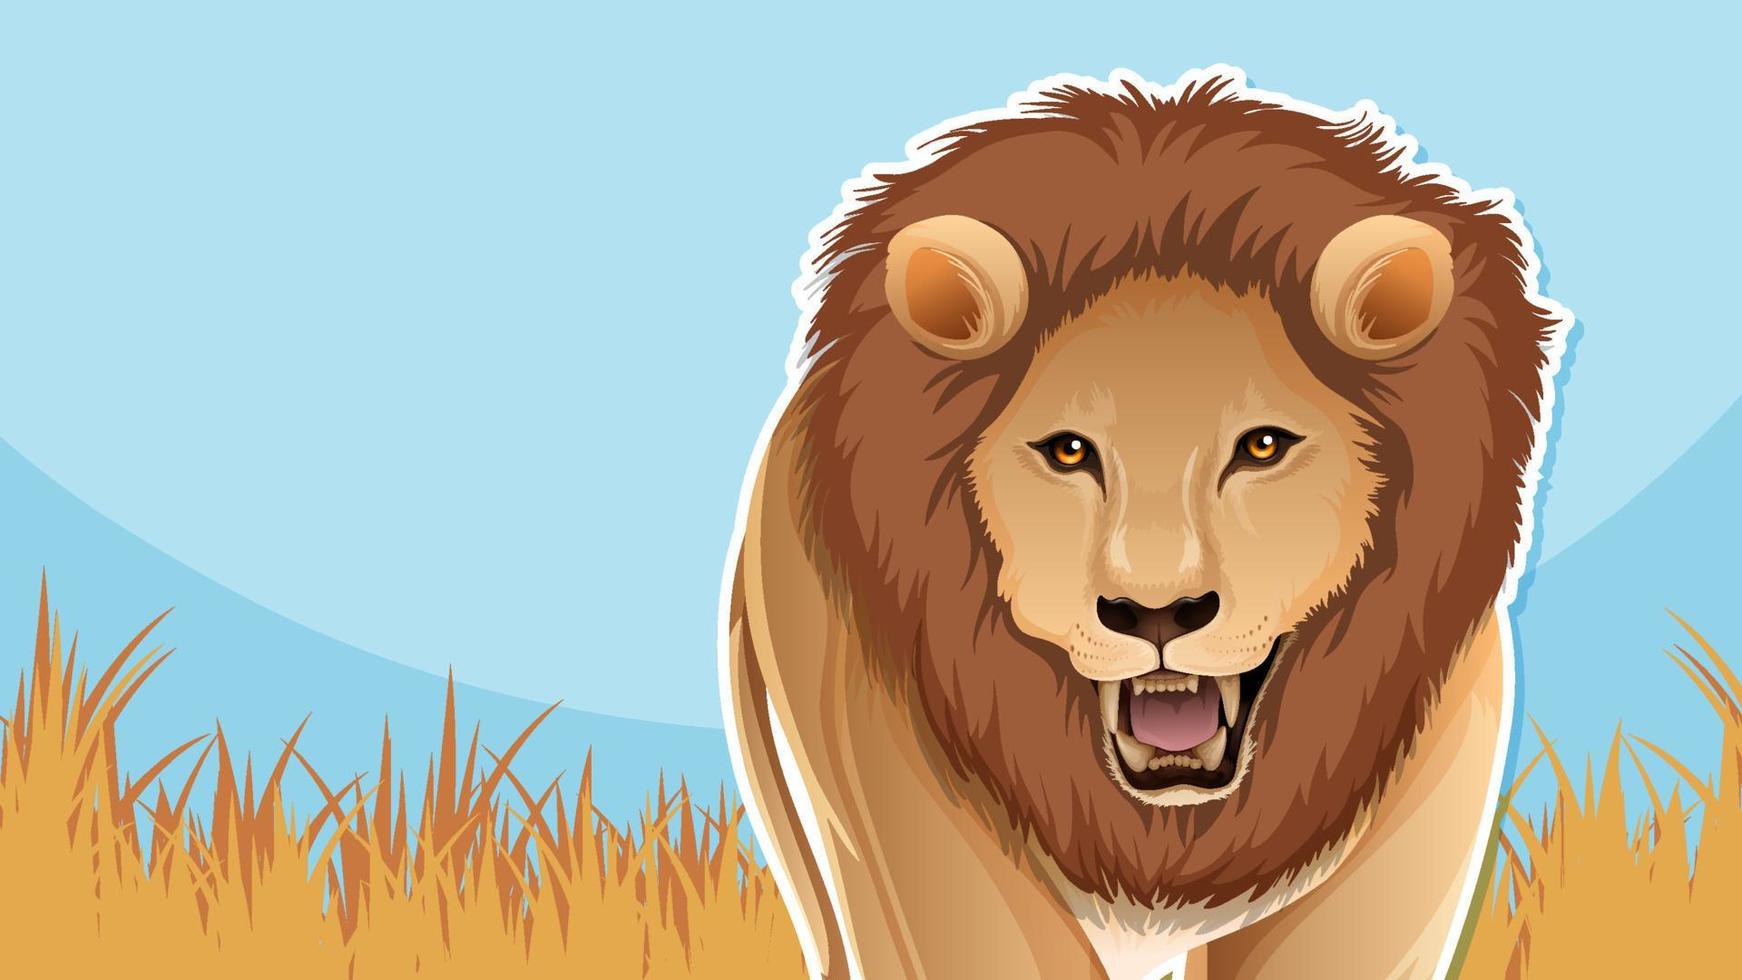 Thumbnail design with lion cartoon character vector